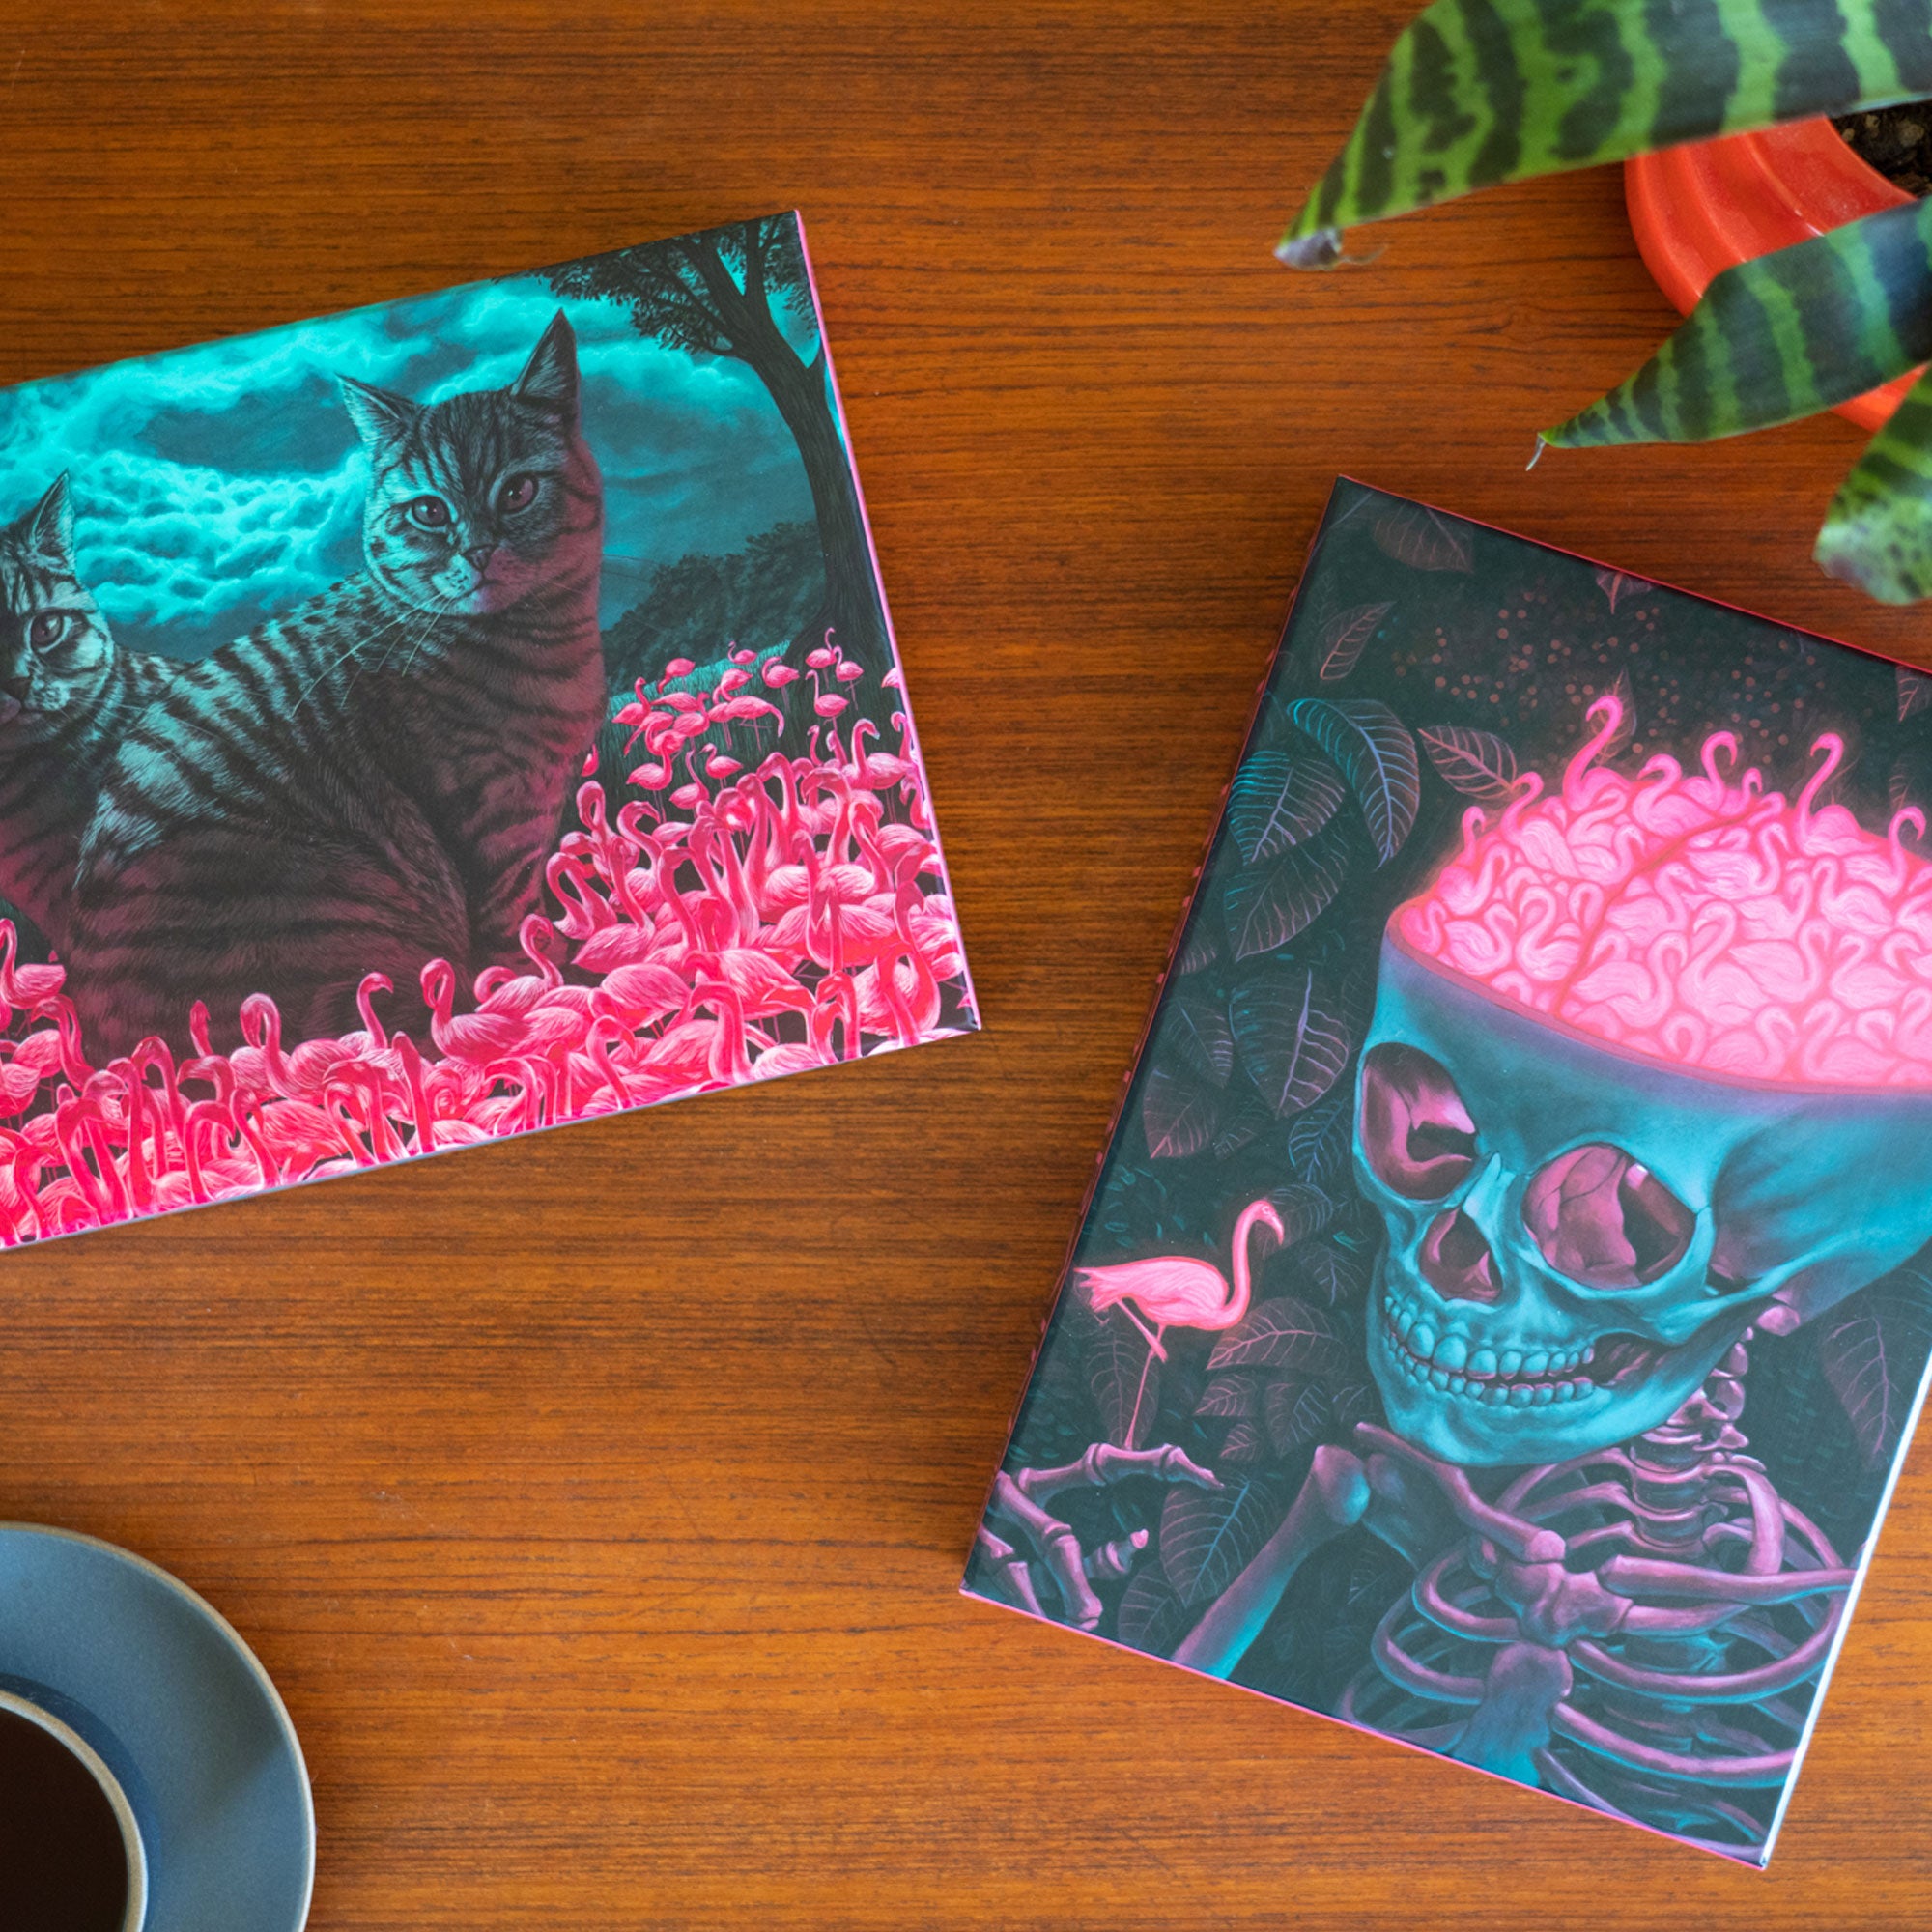 Limited edition jigsaw puzzles by Casey Weldon